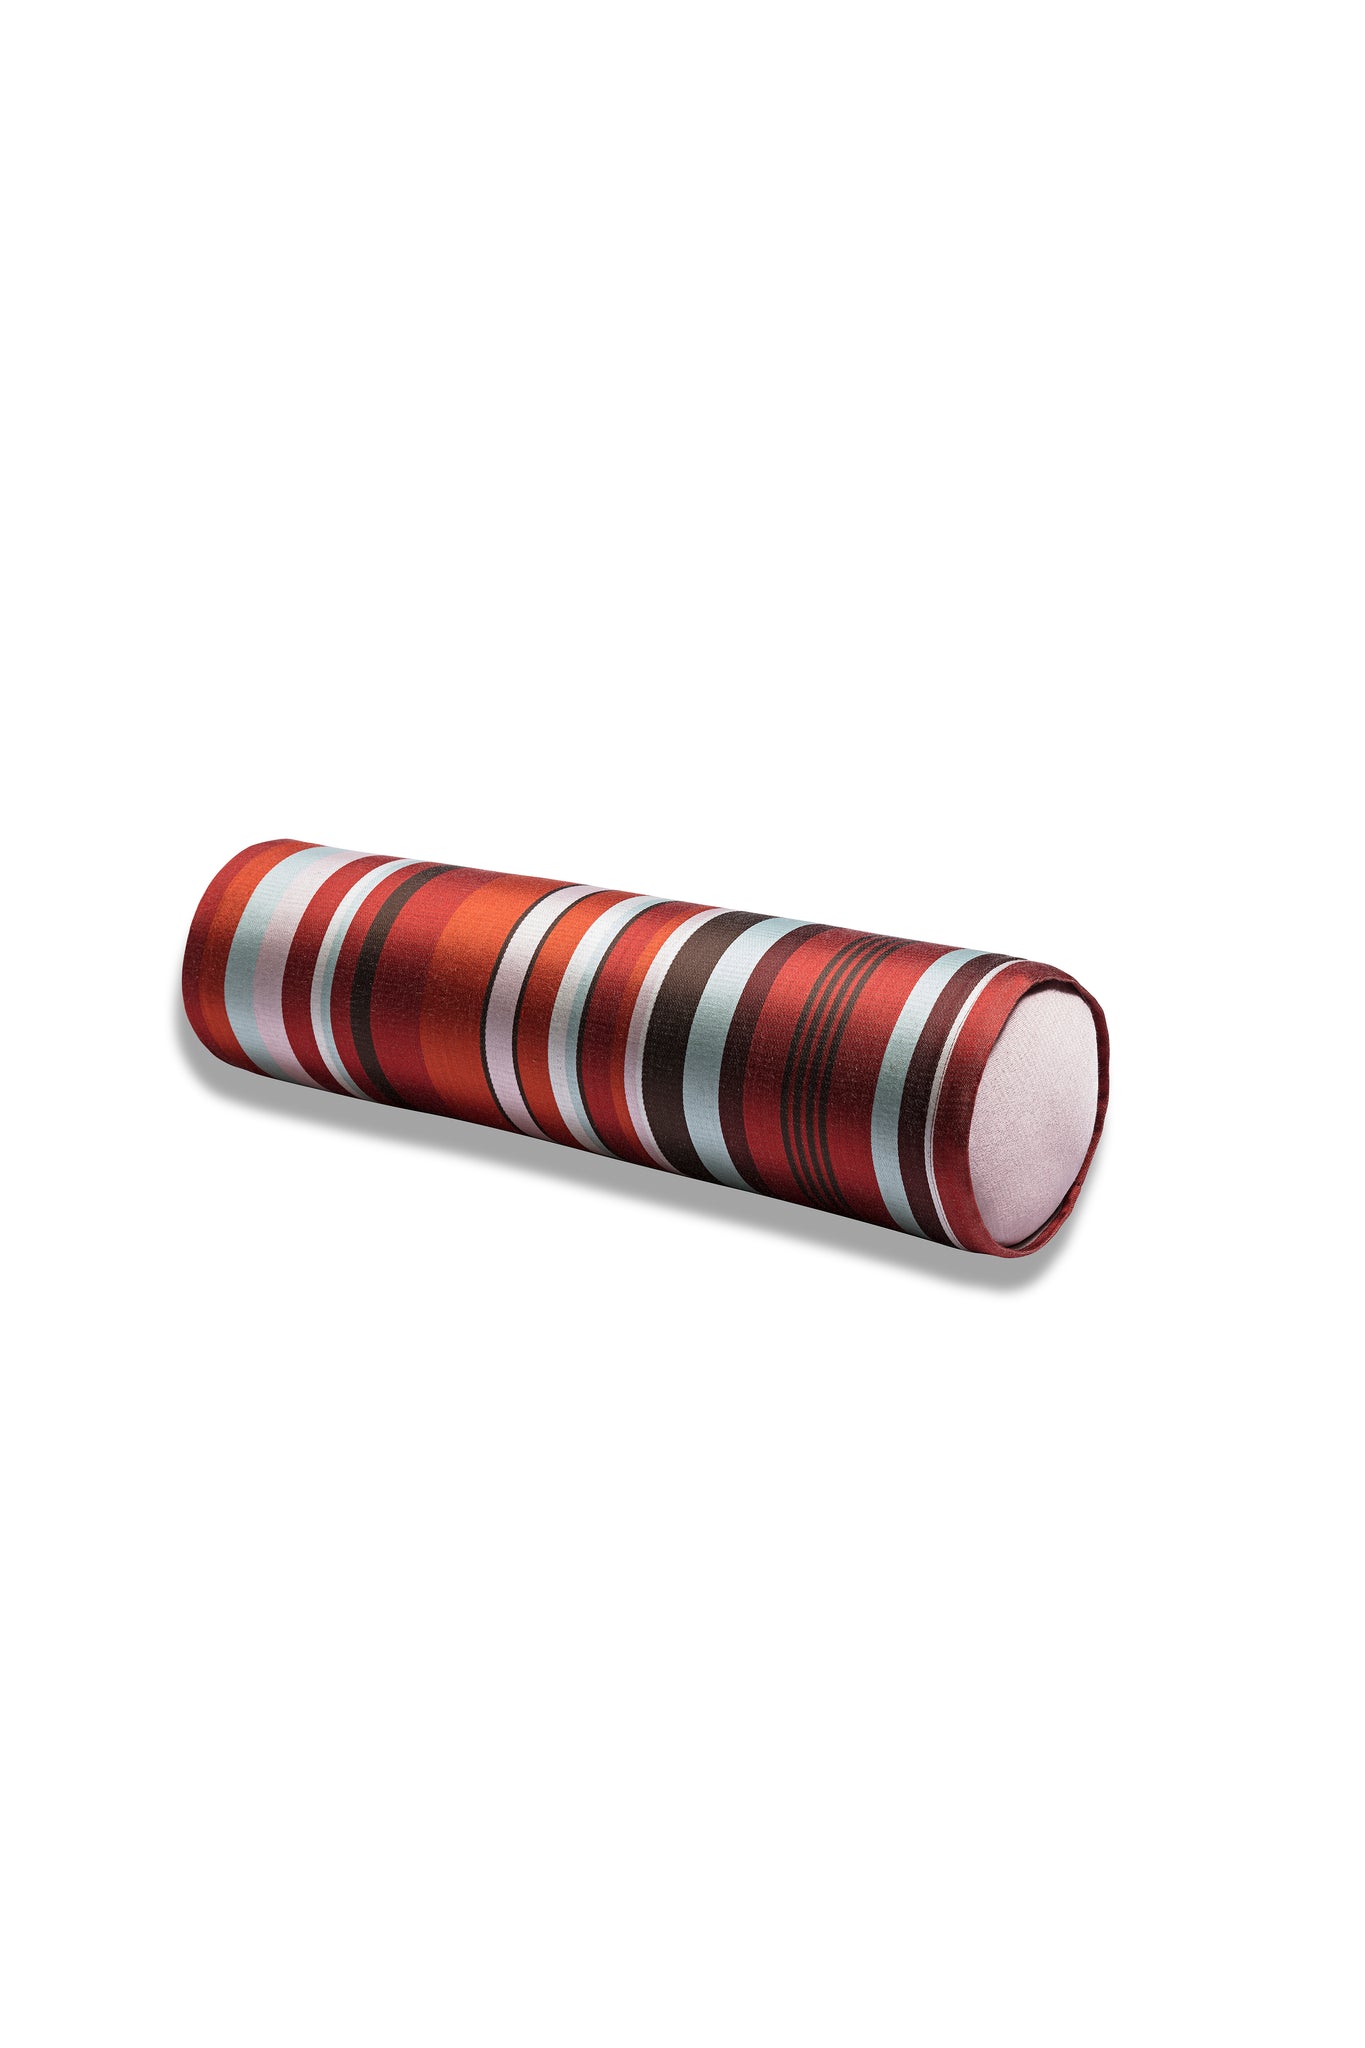 Spice Road Cylinder Pillow